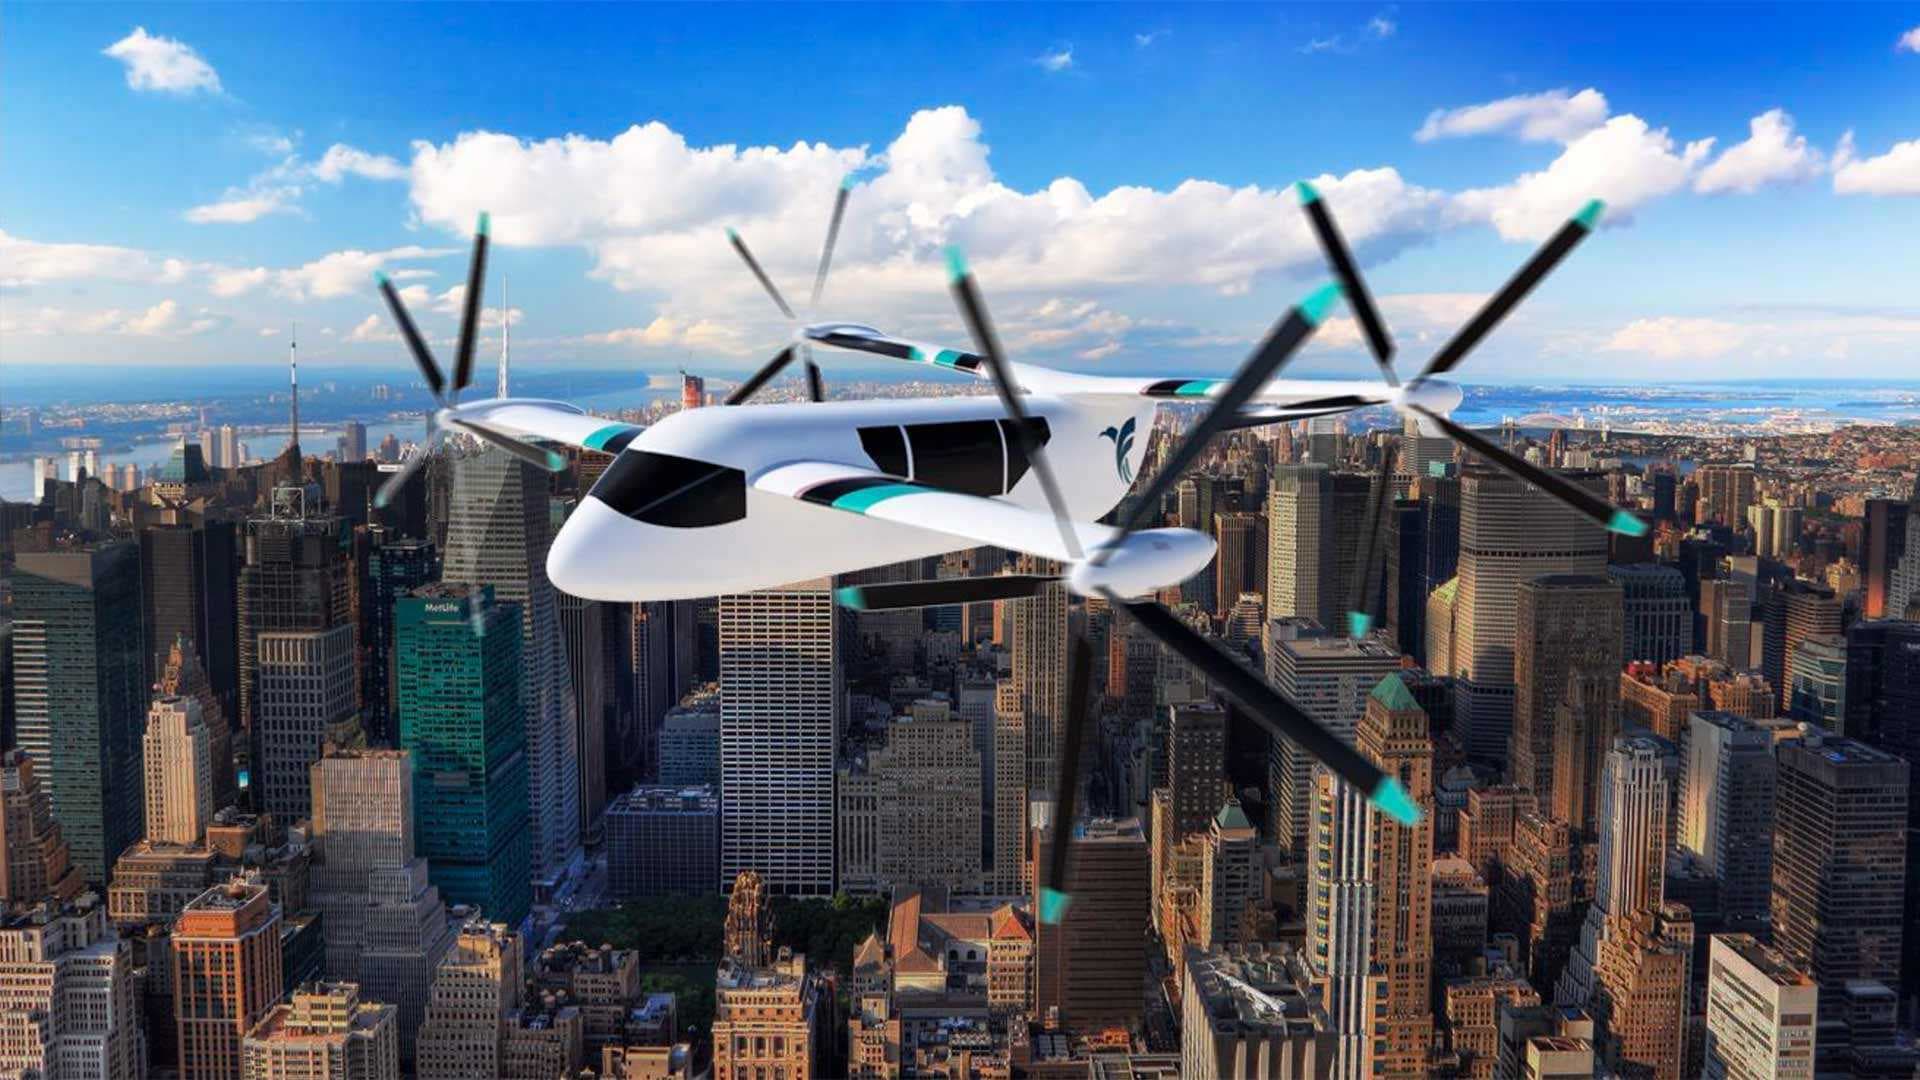 Starling helicopter rendering